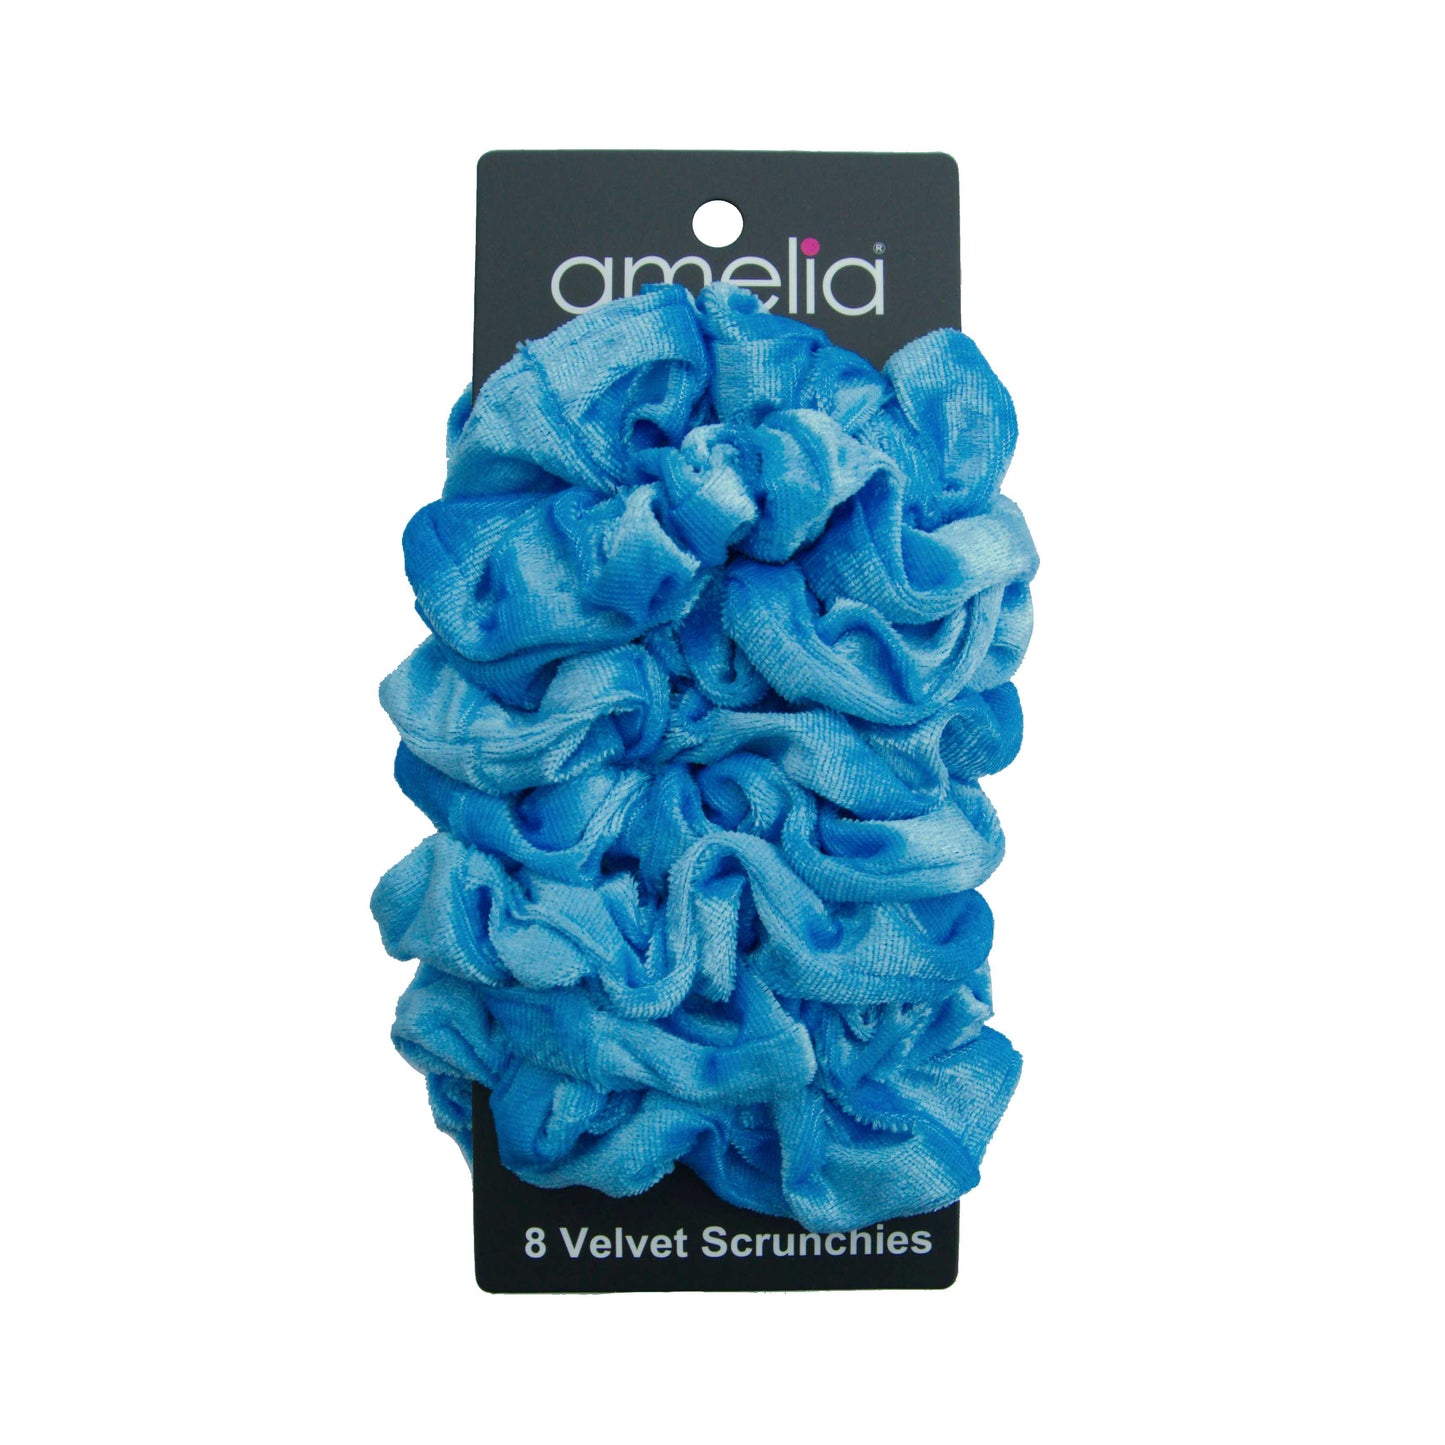 Amelia Beauty, Sky Blue Velvet Scrunchies, 3.5in Diameter, Gentle on Hair, Strong Hold, No Snag, No Dents or Creases. 8 Pack